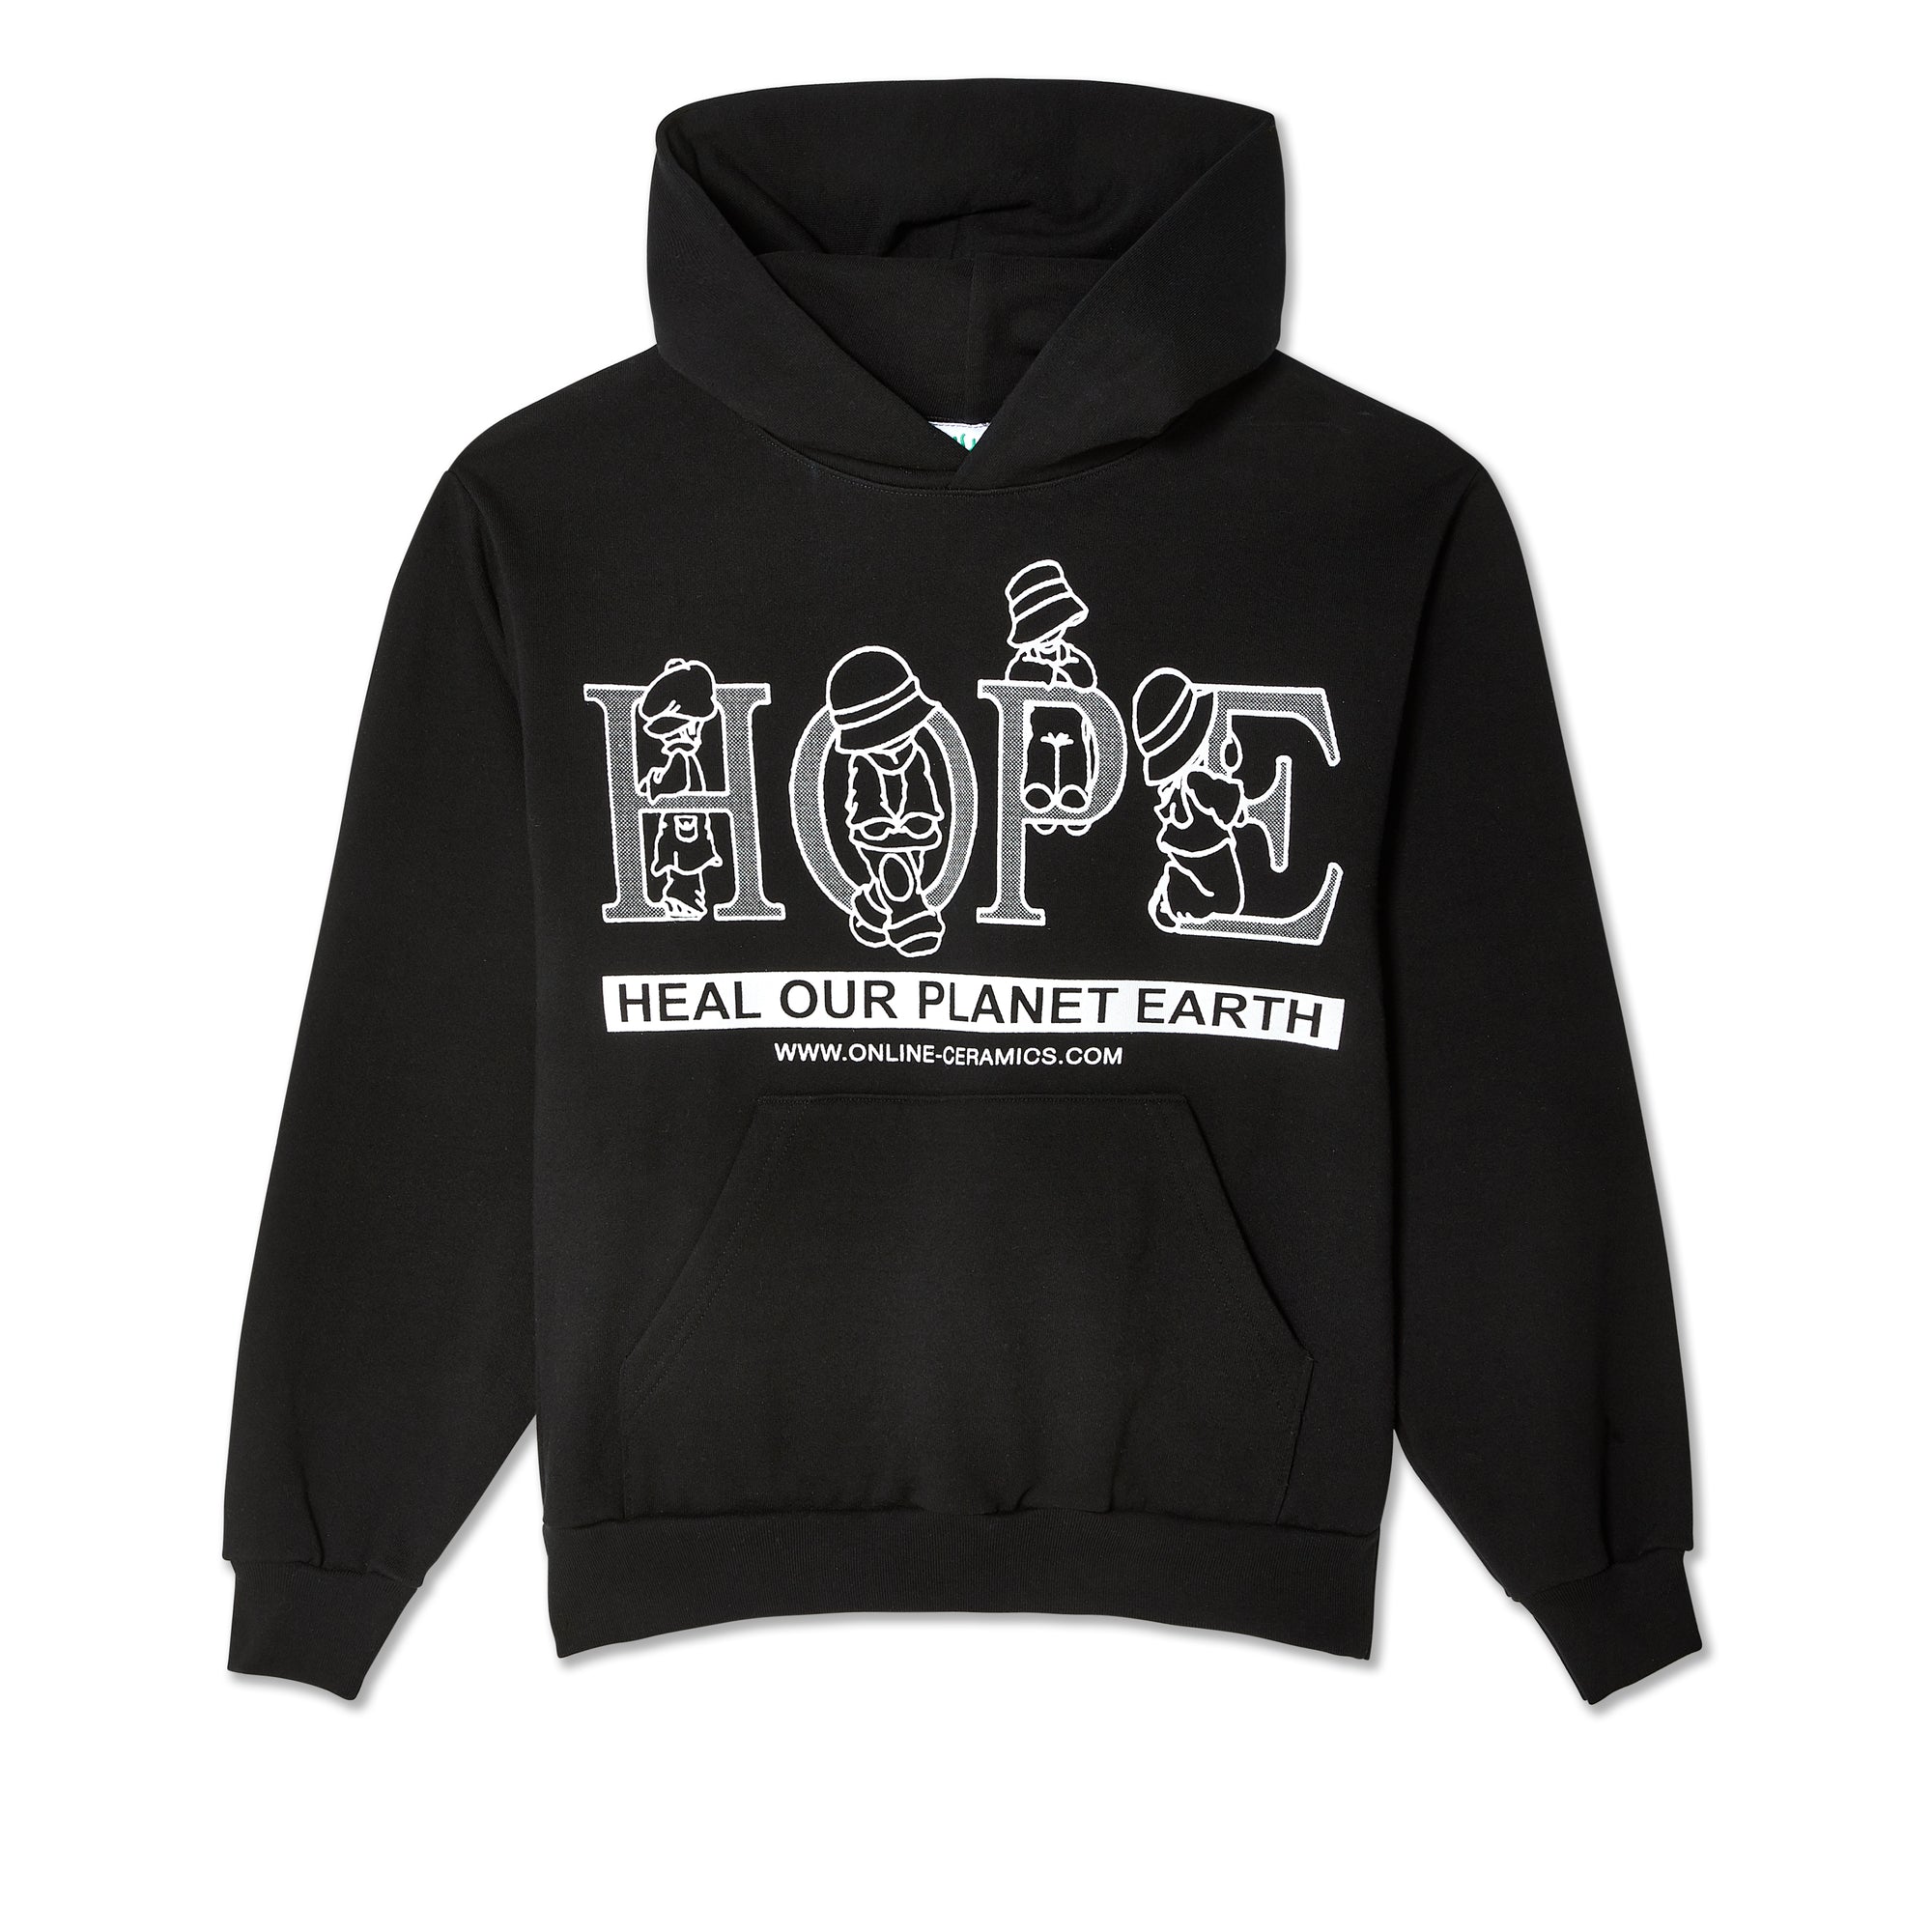 Online Ceramics - Heal Our Planet Earth Hoodie - (Black) view 1